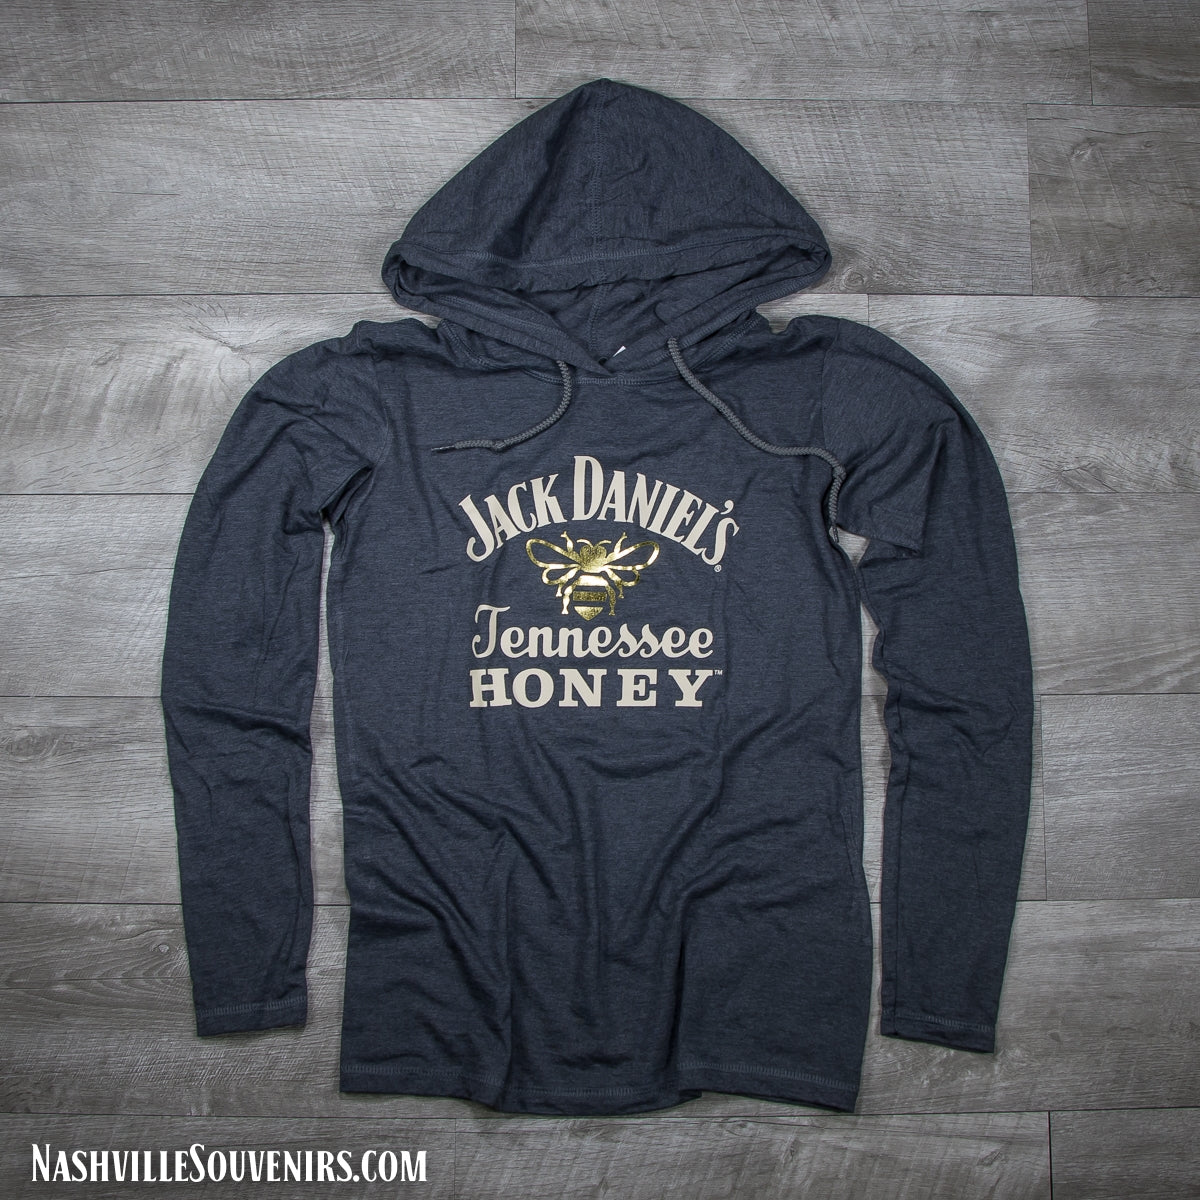 Officially licensed ladies Jack Daniels Tennessee Honey Hoodie in gray with the TN Honeybee Logo. Get yours today with FREE SHIPPING on all US orders over $75!